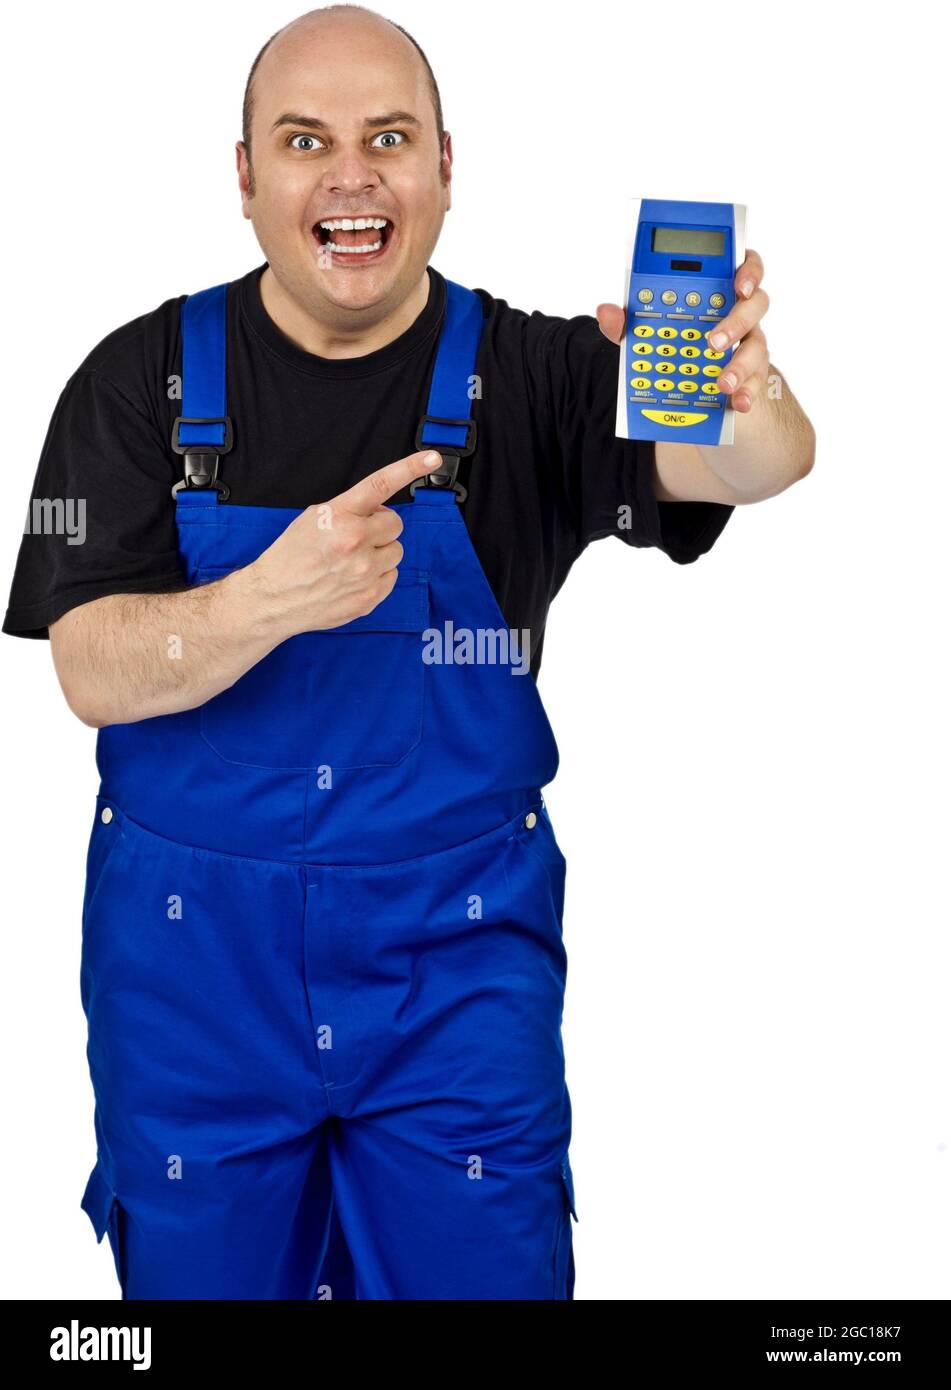 construction worker in blue dungarees enthusiastically pointing to a pocket calculator Stock Photo